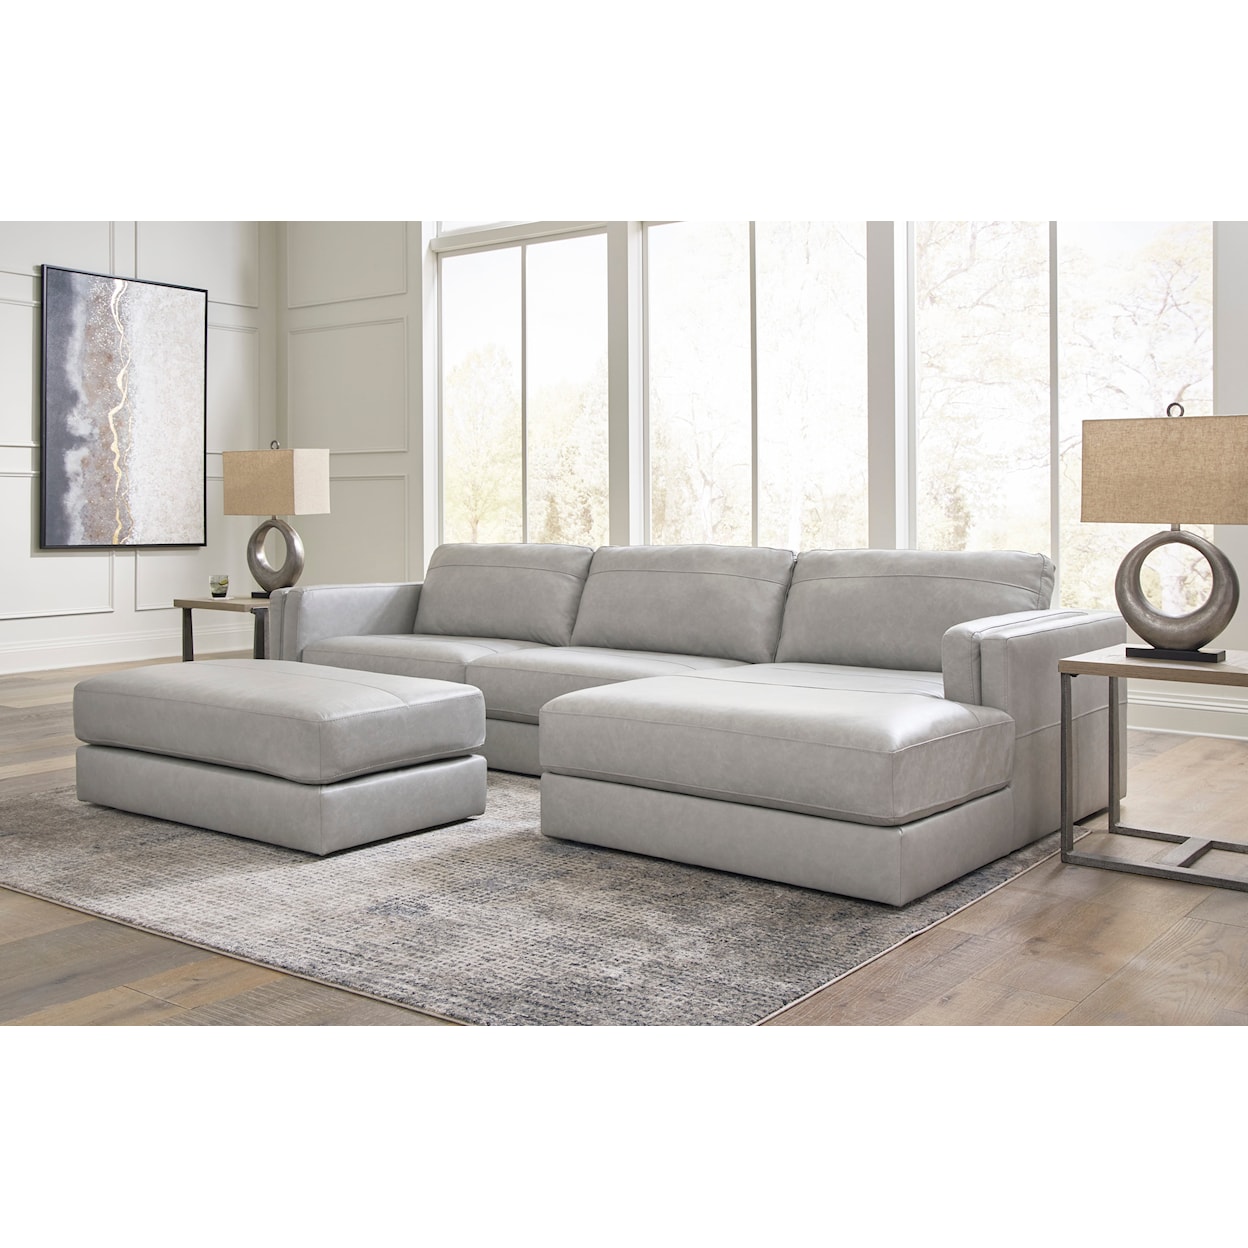 Benchcraft Amiata 2-Piece Sectional With Chaise